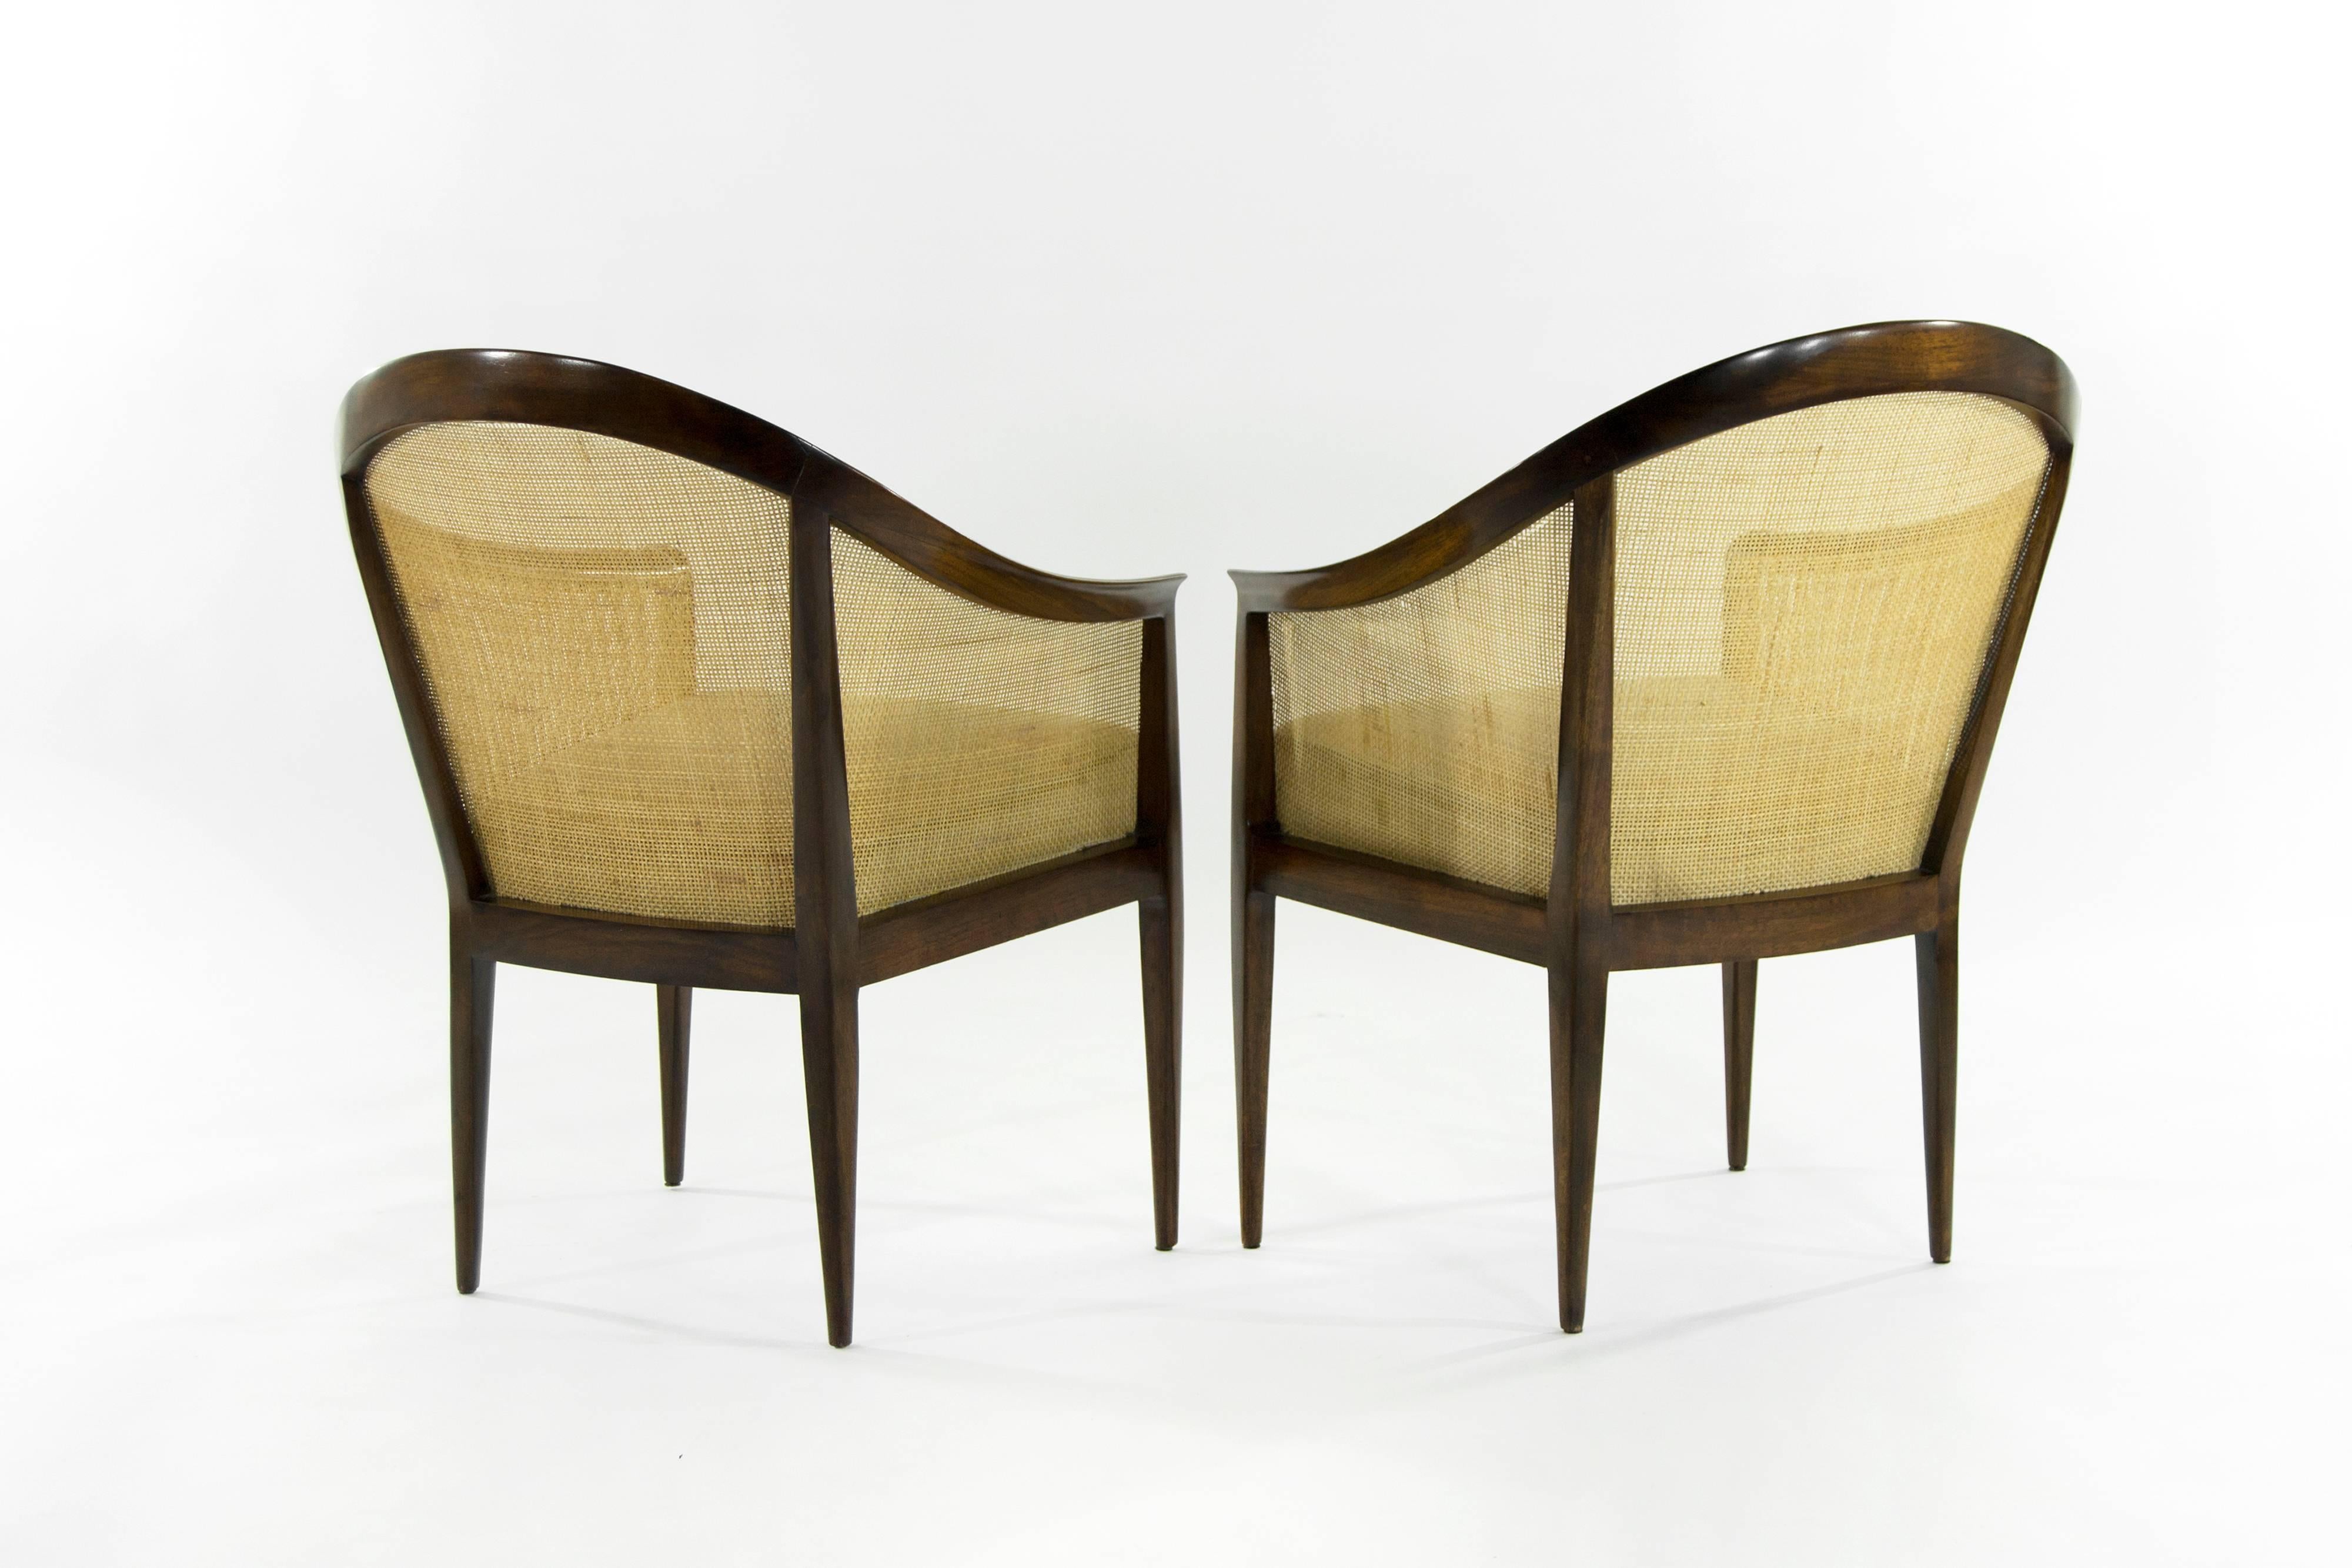 20th Century Pair of Lounge Chairs by Kipp Stewart for Directional